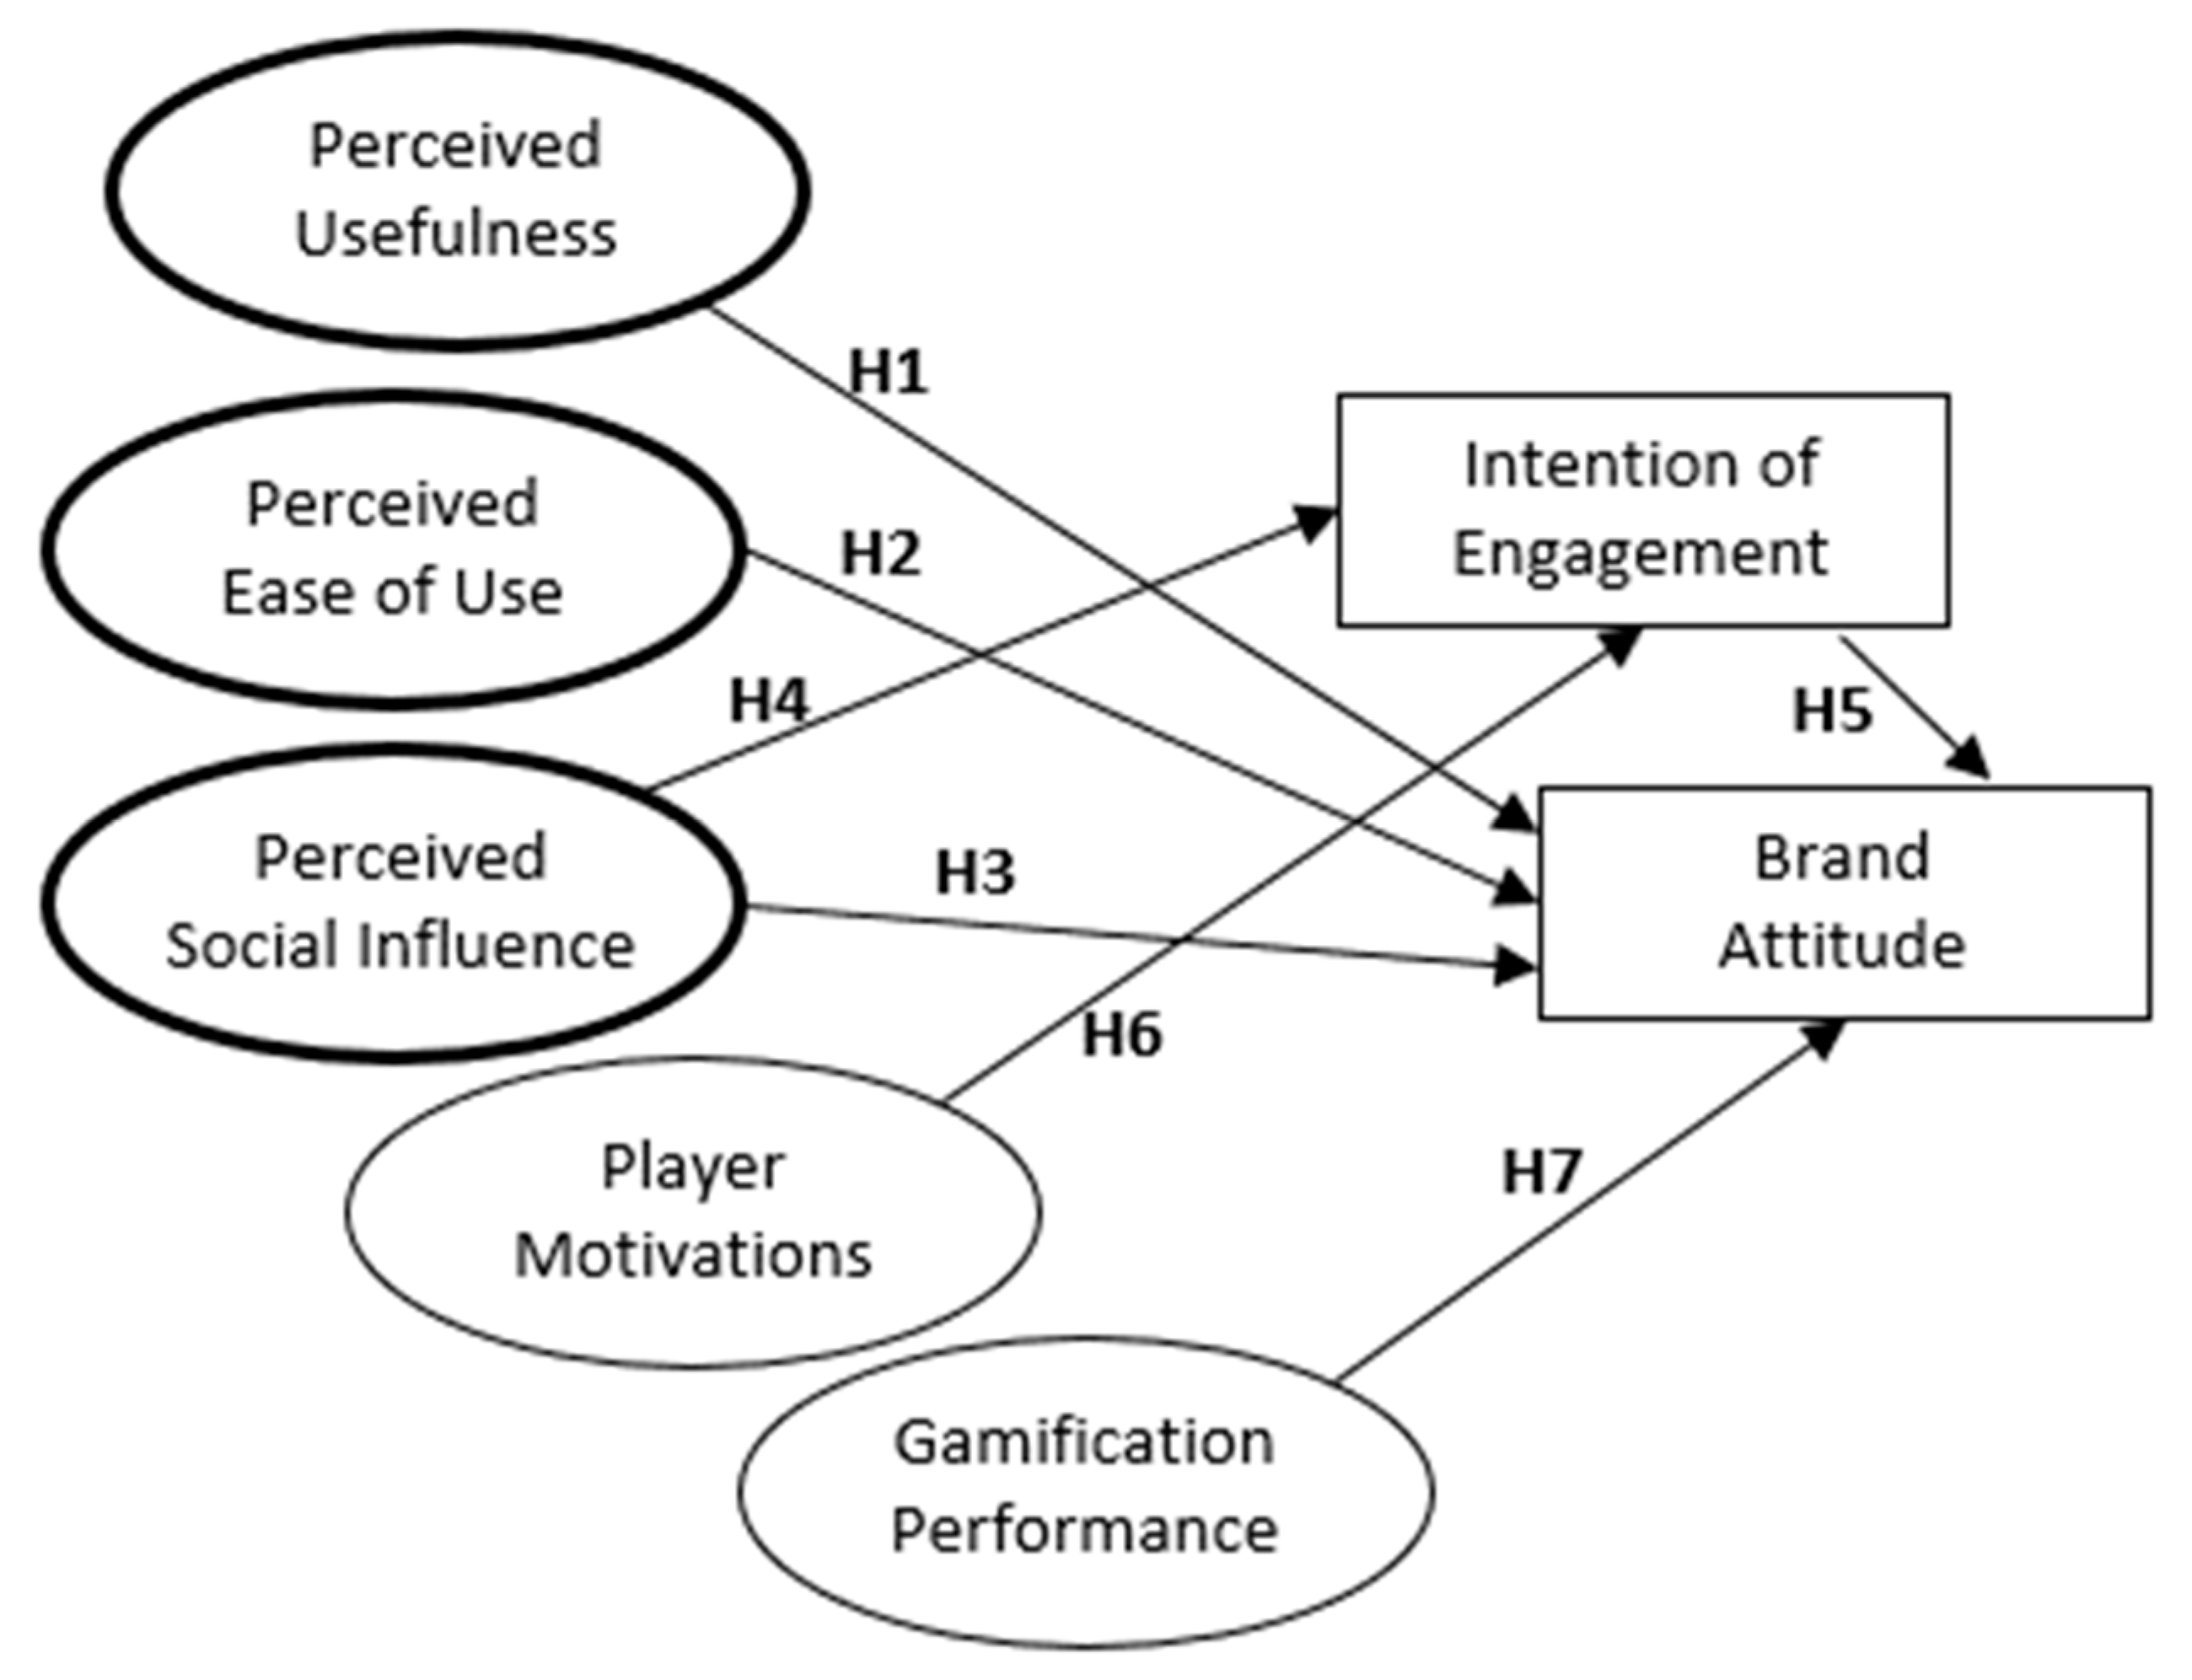 Administrative Sciences | Free Full-Text | How Can Gamified Applications  Drive Engagement and Brand Attitude? The Case of Nike Run Club Application  | HTML